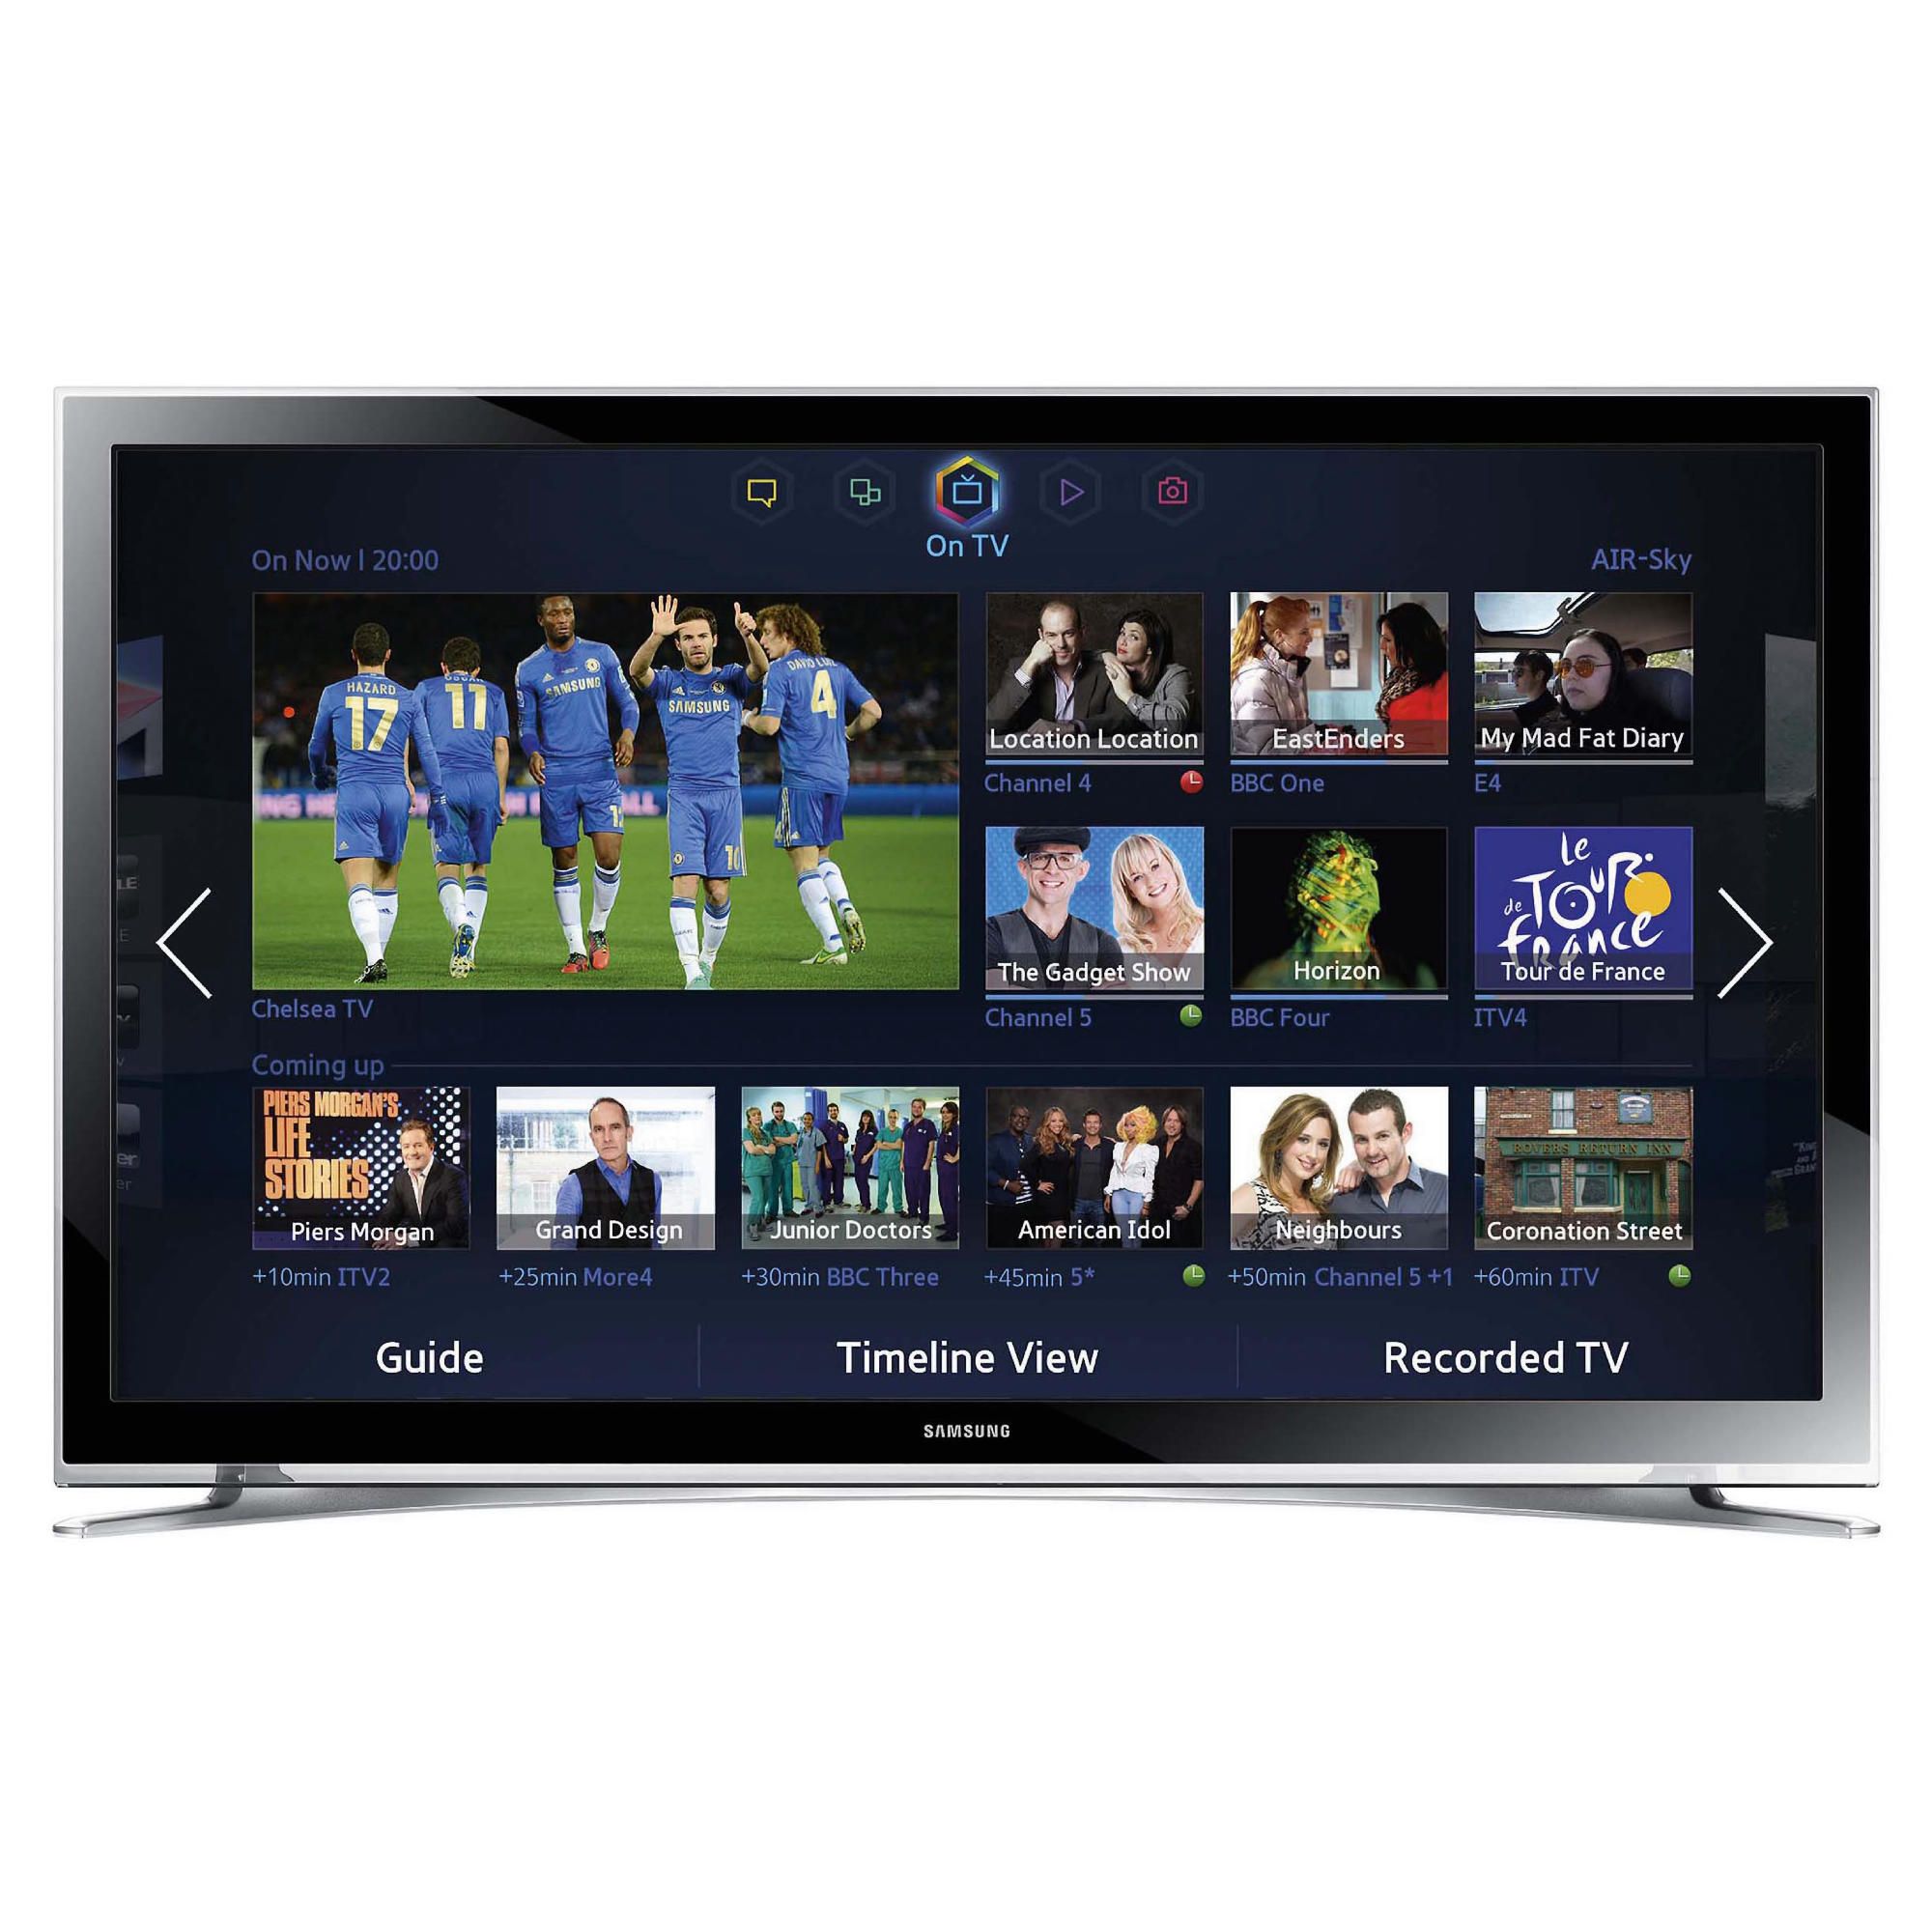 Samsung UE32F4500 32 Inch HD Ready 720p LED Smart TV with Freeview